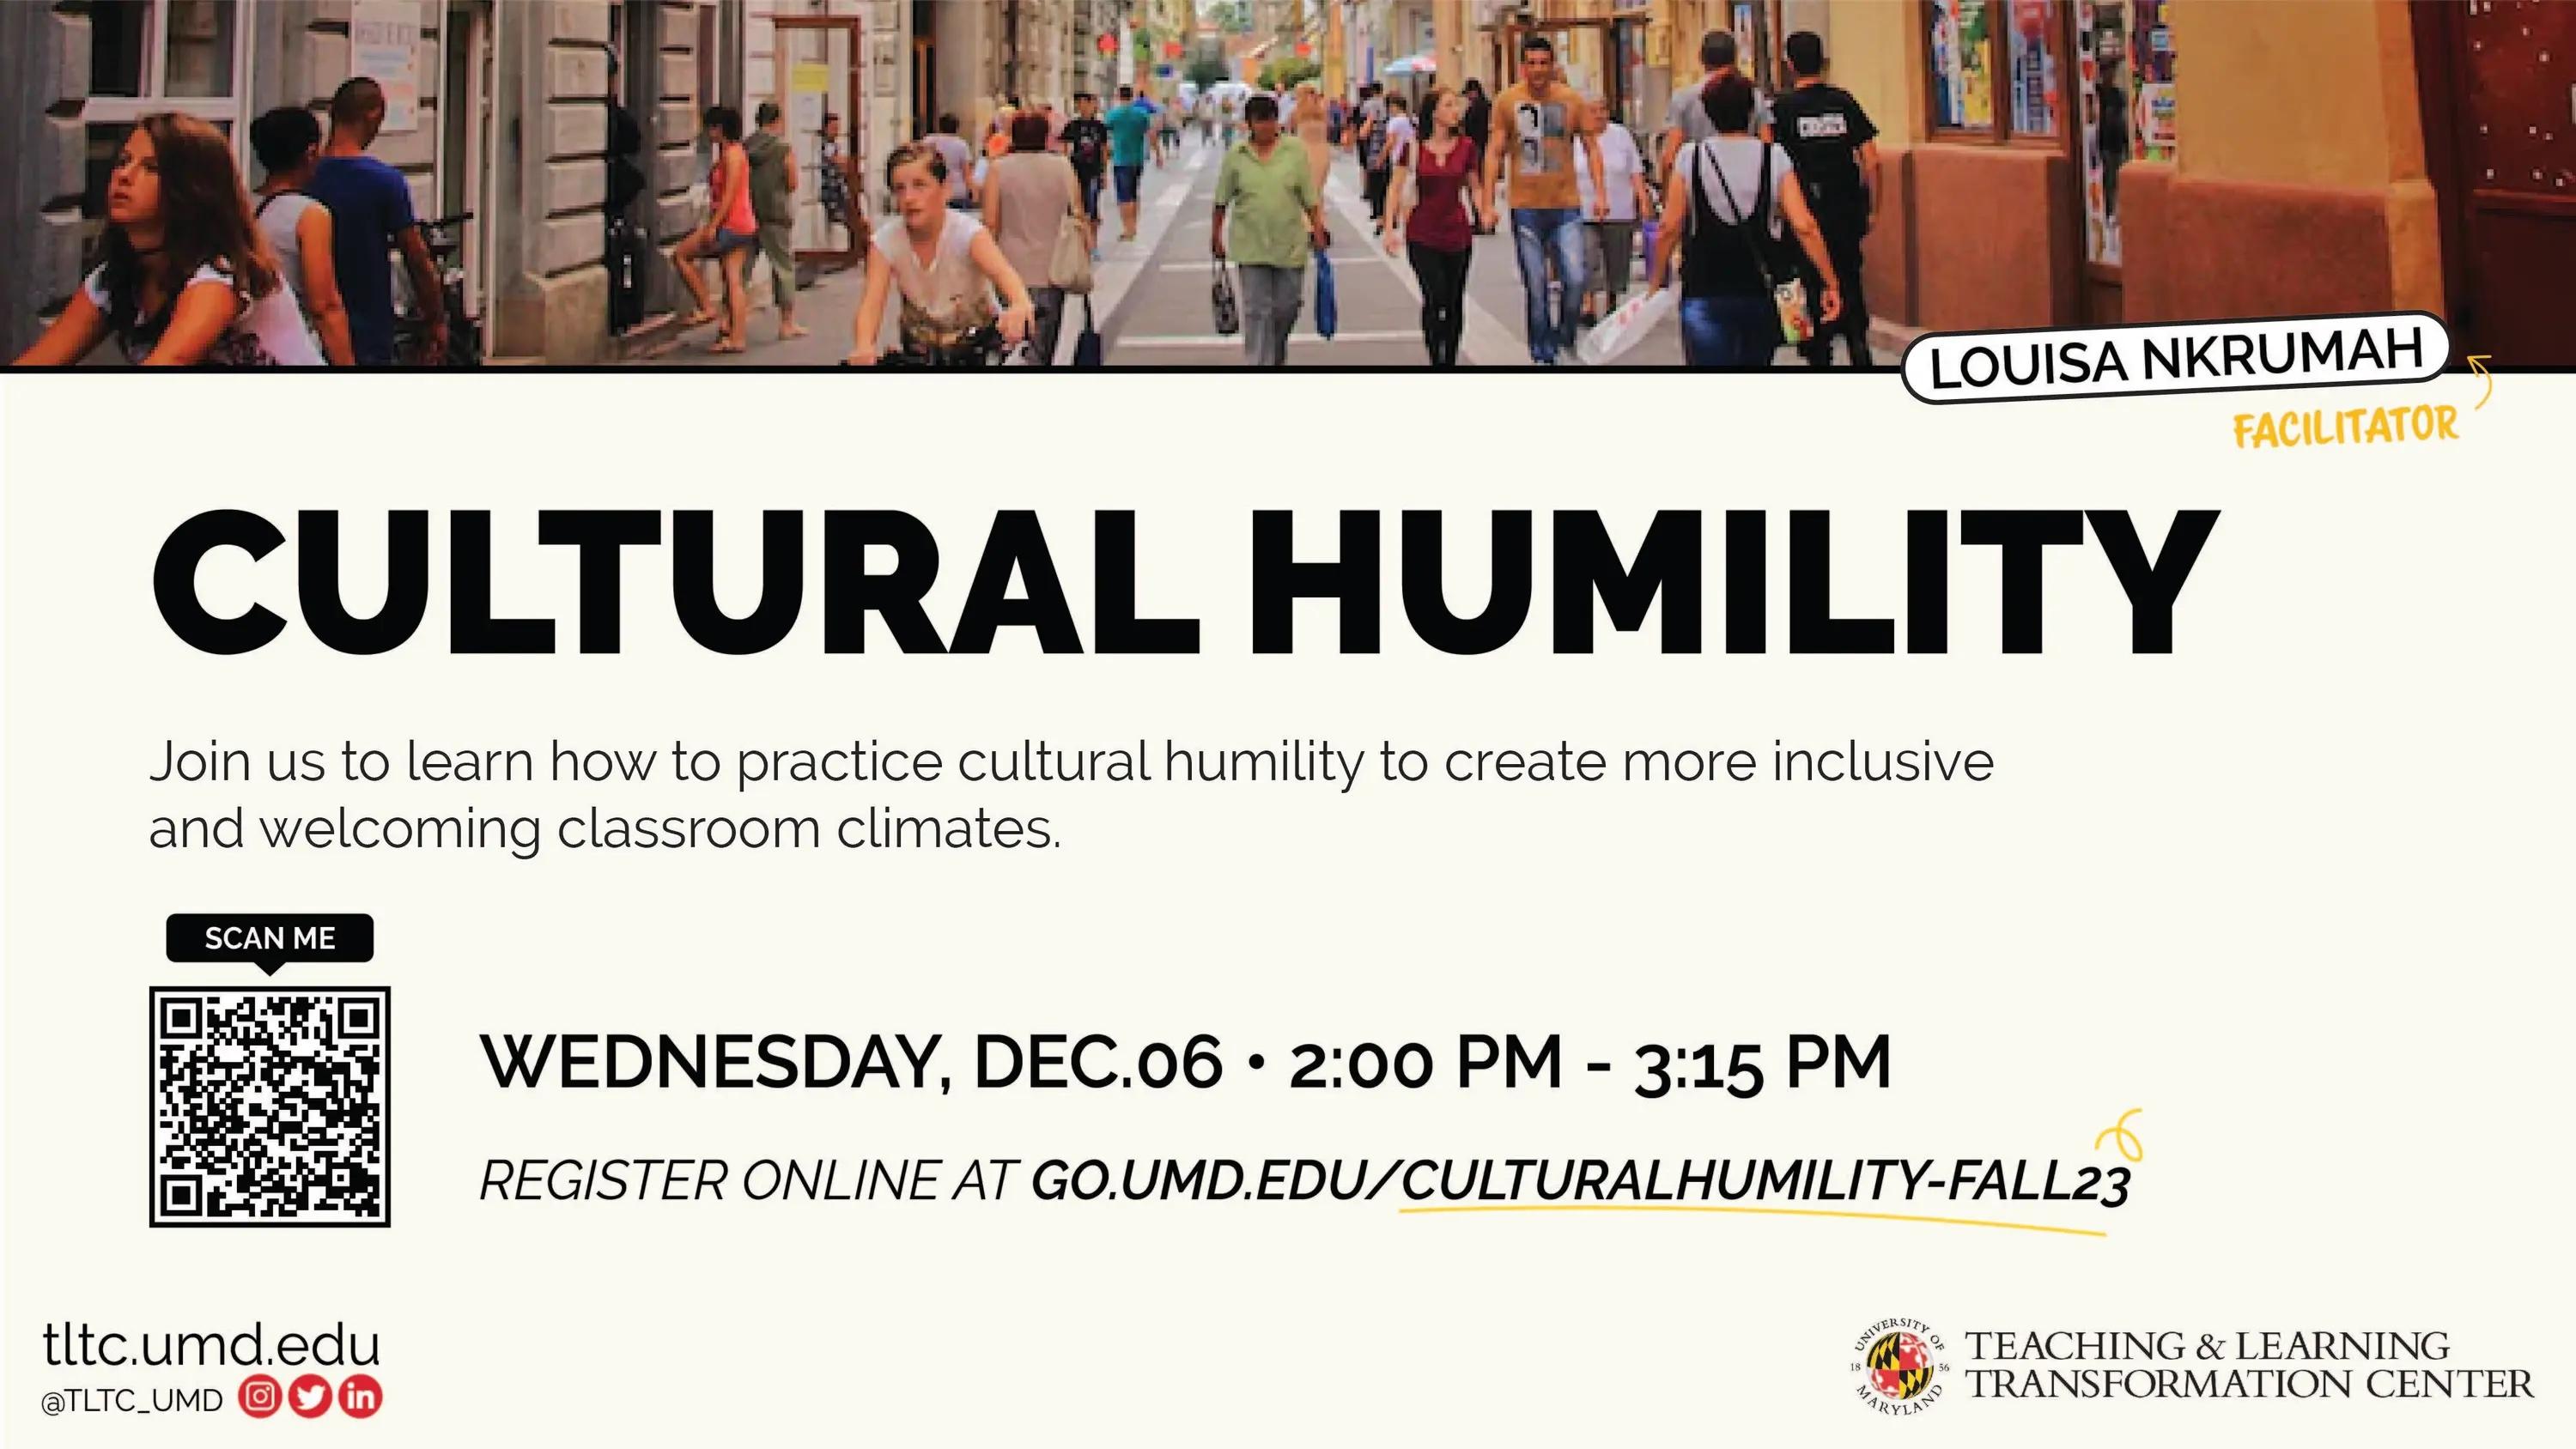 Graphic with text "Cultural Humility: Join us to learn how to practice cultural humility to create more inclusive and welcoming classroom climates.